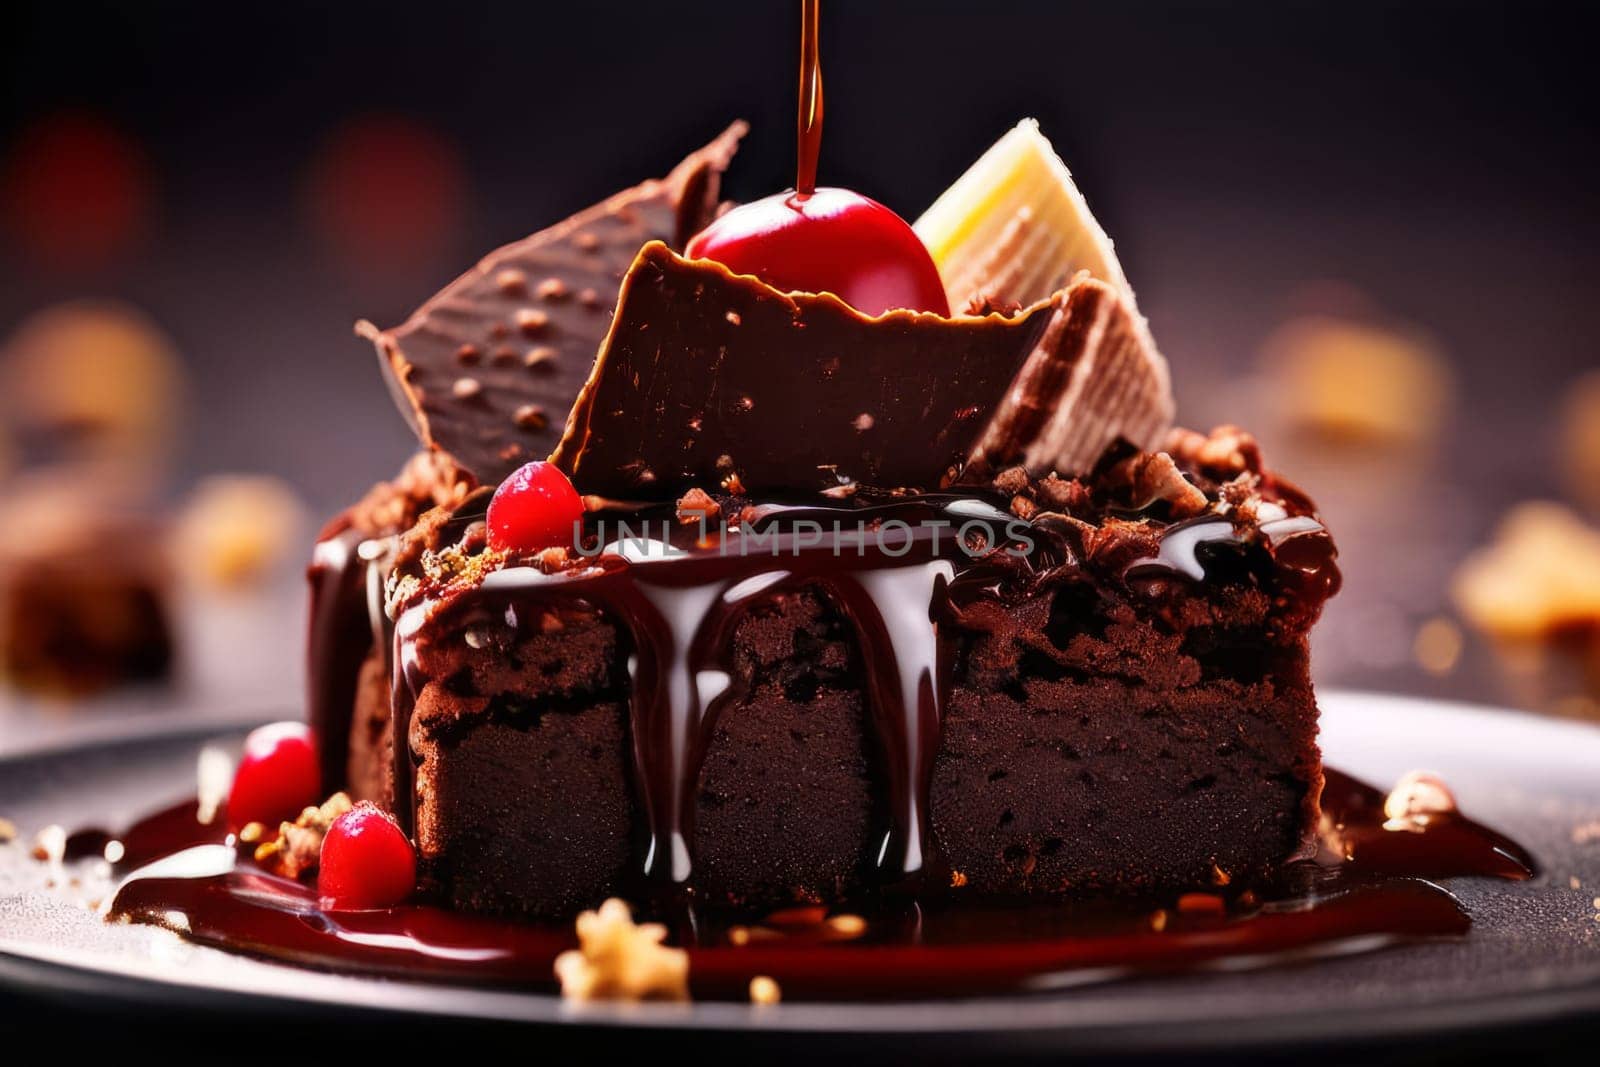 Decadent piece of chocolate cake being generously drizzled with rich, velvety chocolate sauce, creating mouthwatering, indulgent dessert. For advertising chocolate products, desserts in general